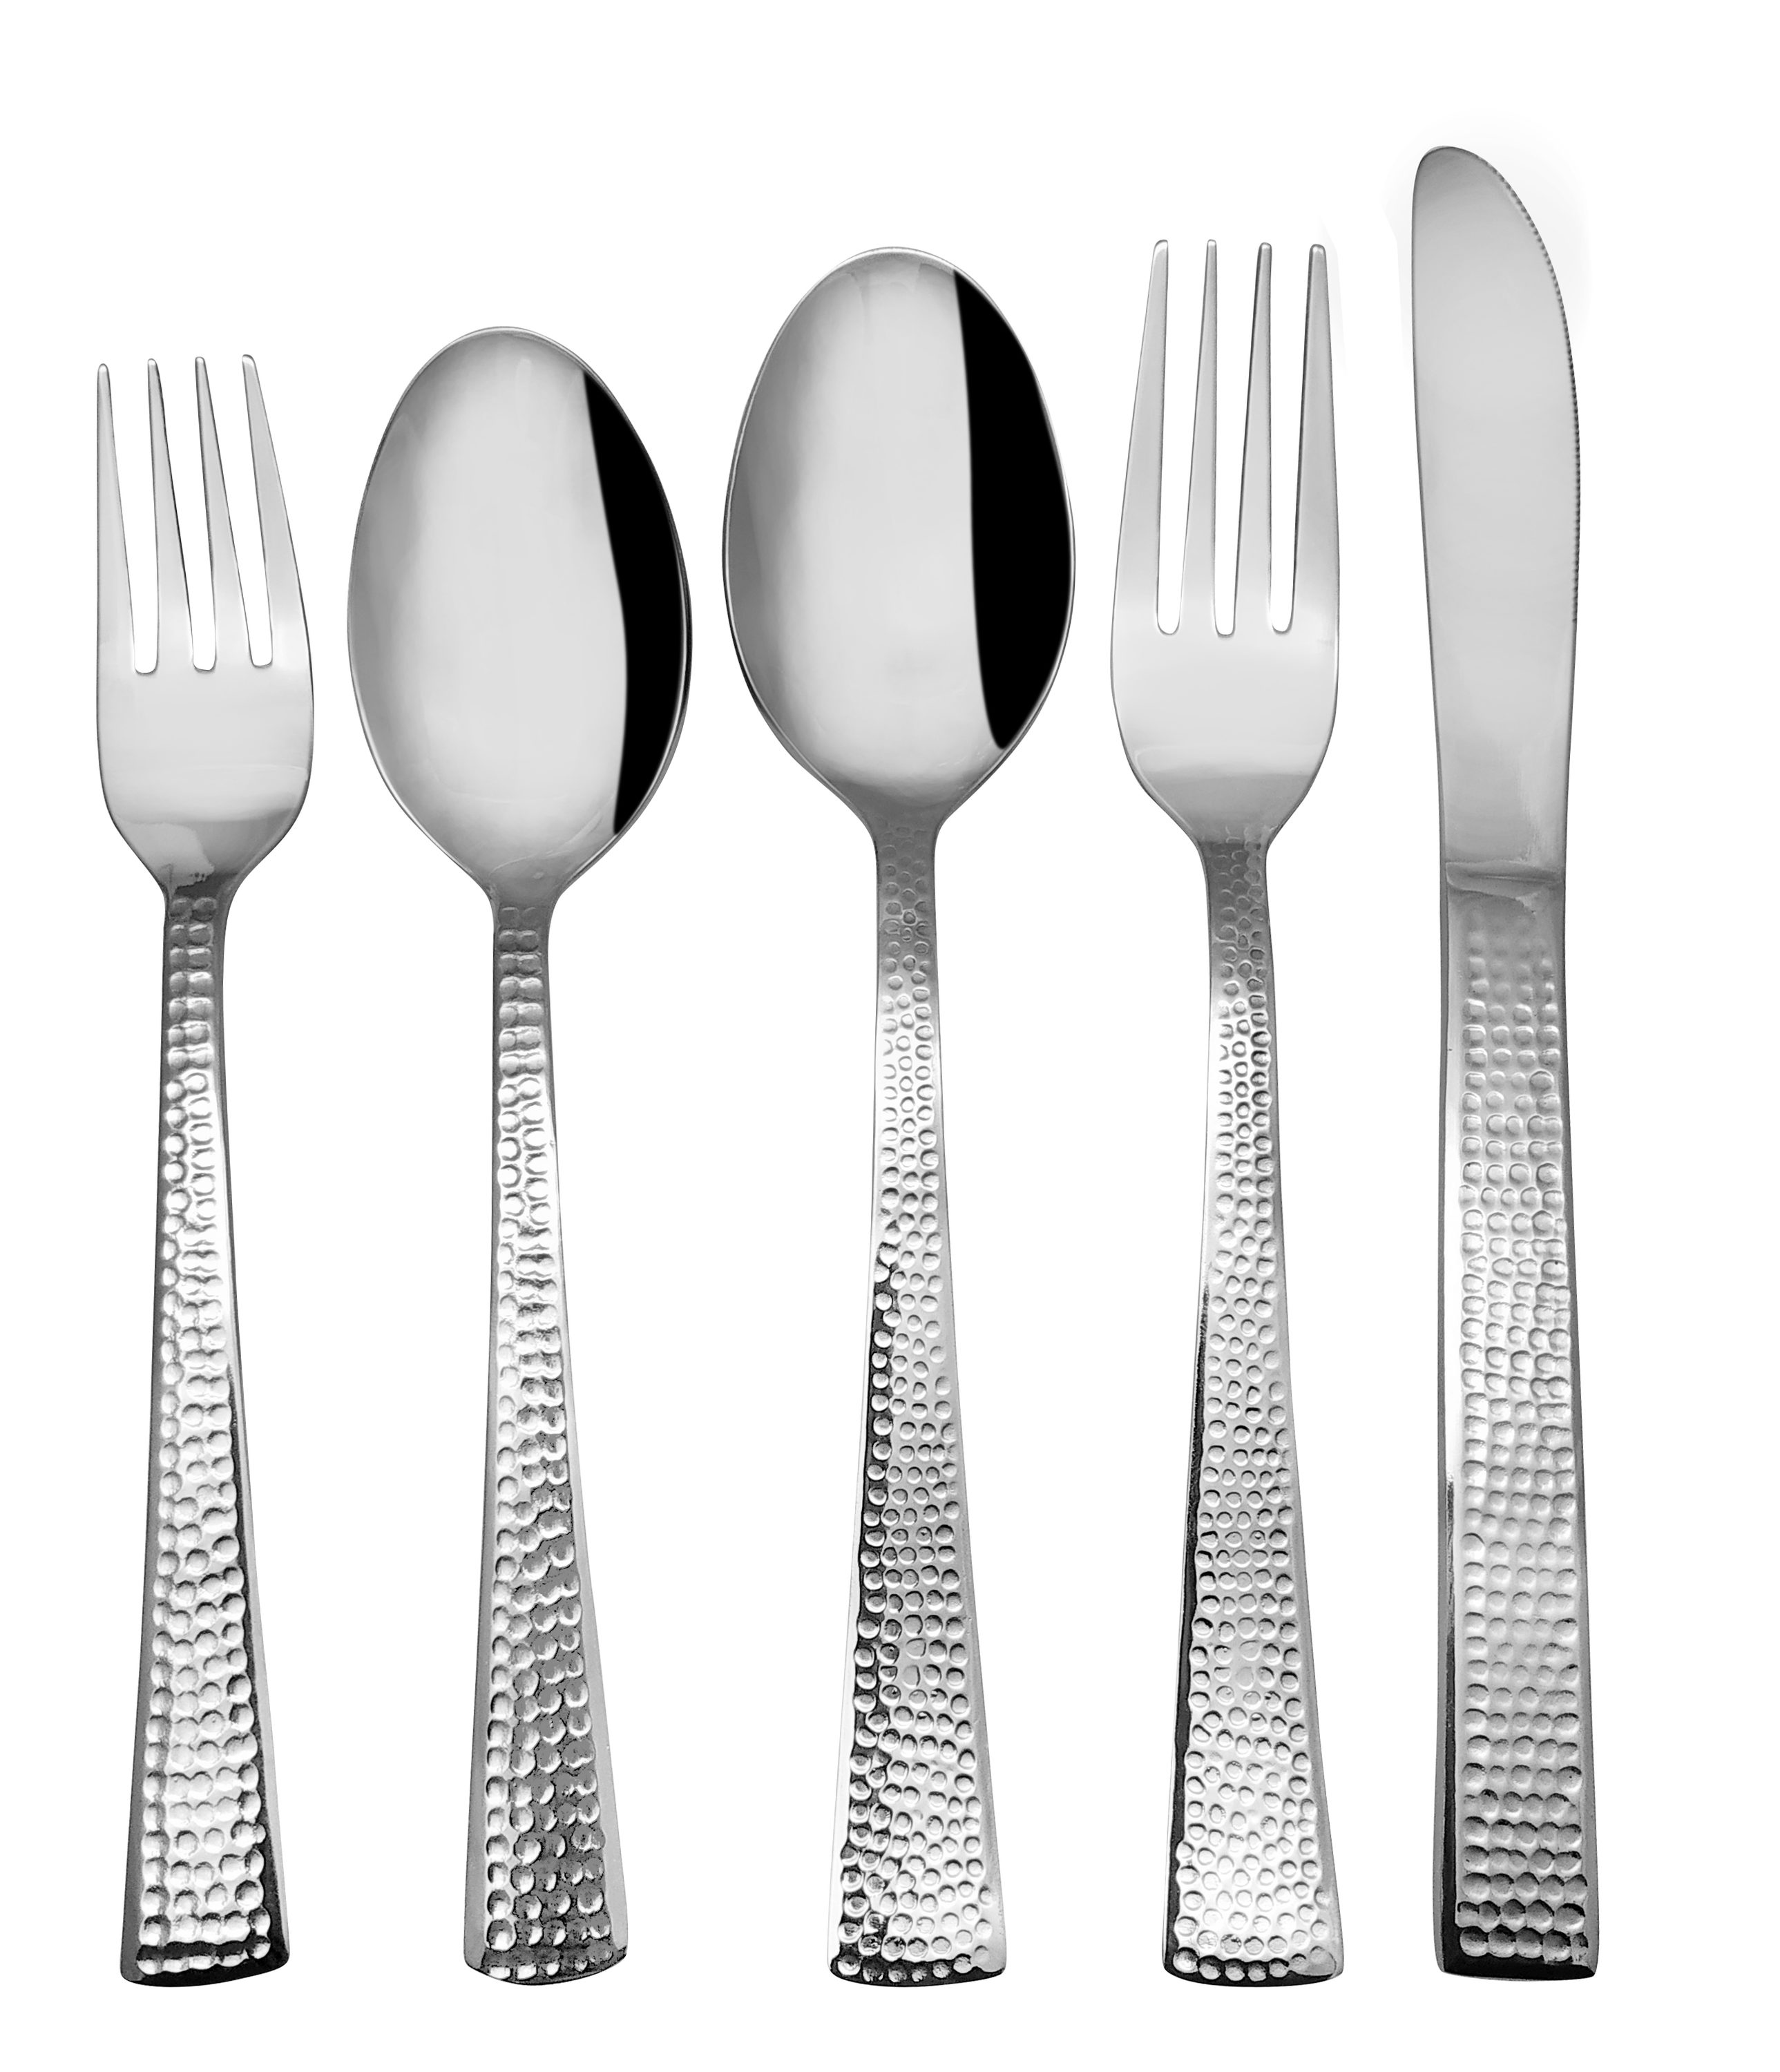 Just Houseware Silverware Set 20 Pieces, Stainless Steel Flatware Set,  Mirror Polish Cutlery Set, Knives Forks Spoons Service for 4 